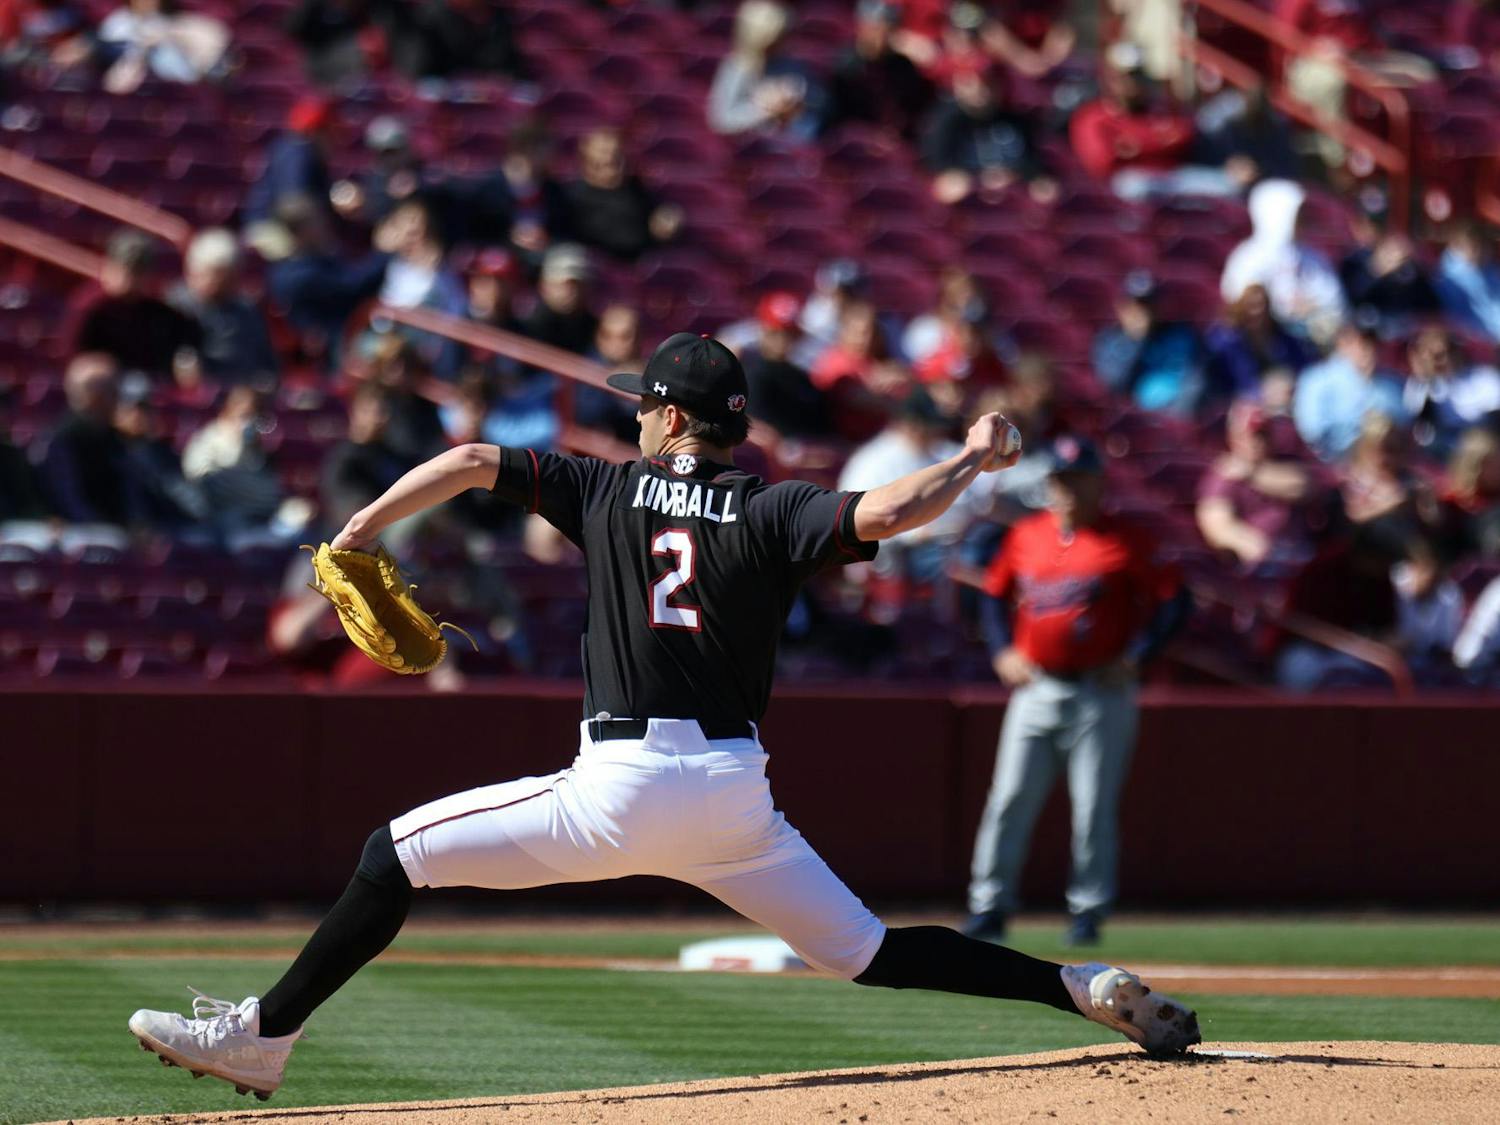 Redshirt sophomore pitcher Roman Kimball throws the ball during South Carolina's game against Belmont at Founders Park on Feb. 25, 2024. The Gamecocks clinched the series with Sunday's 12-1 victory over the Bruins.